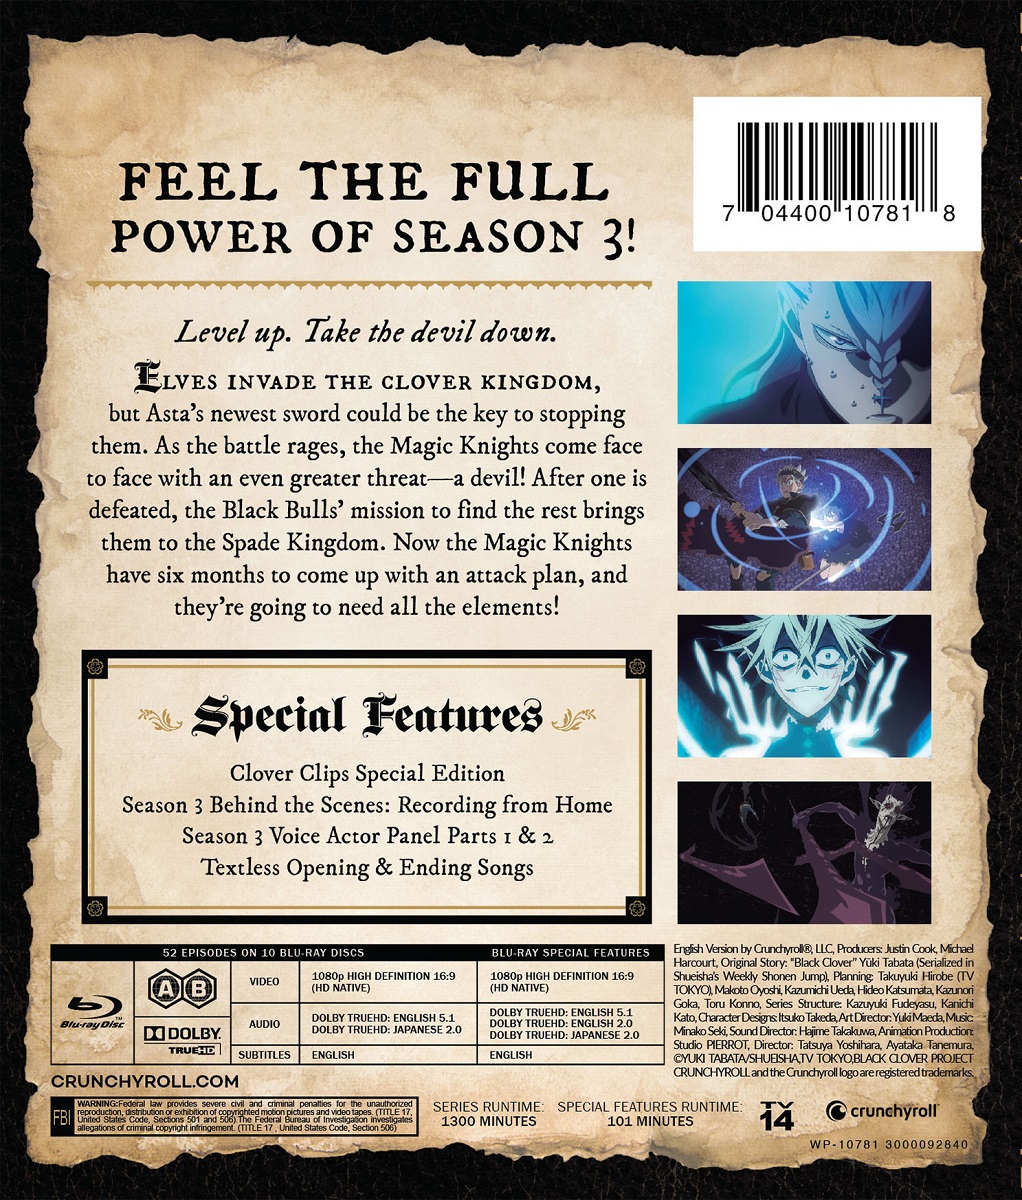 Black Clover Season 3 Complete Collection Blu-ray image count 1